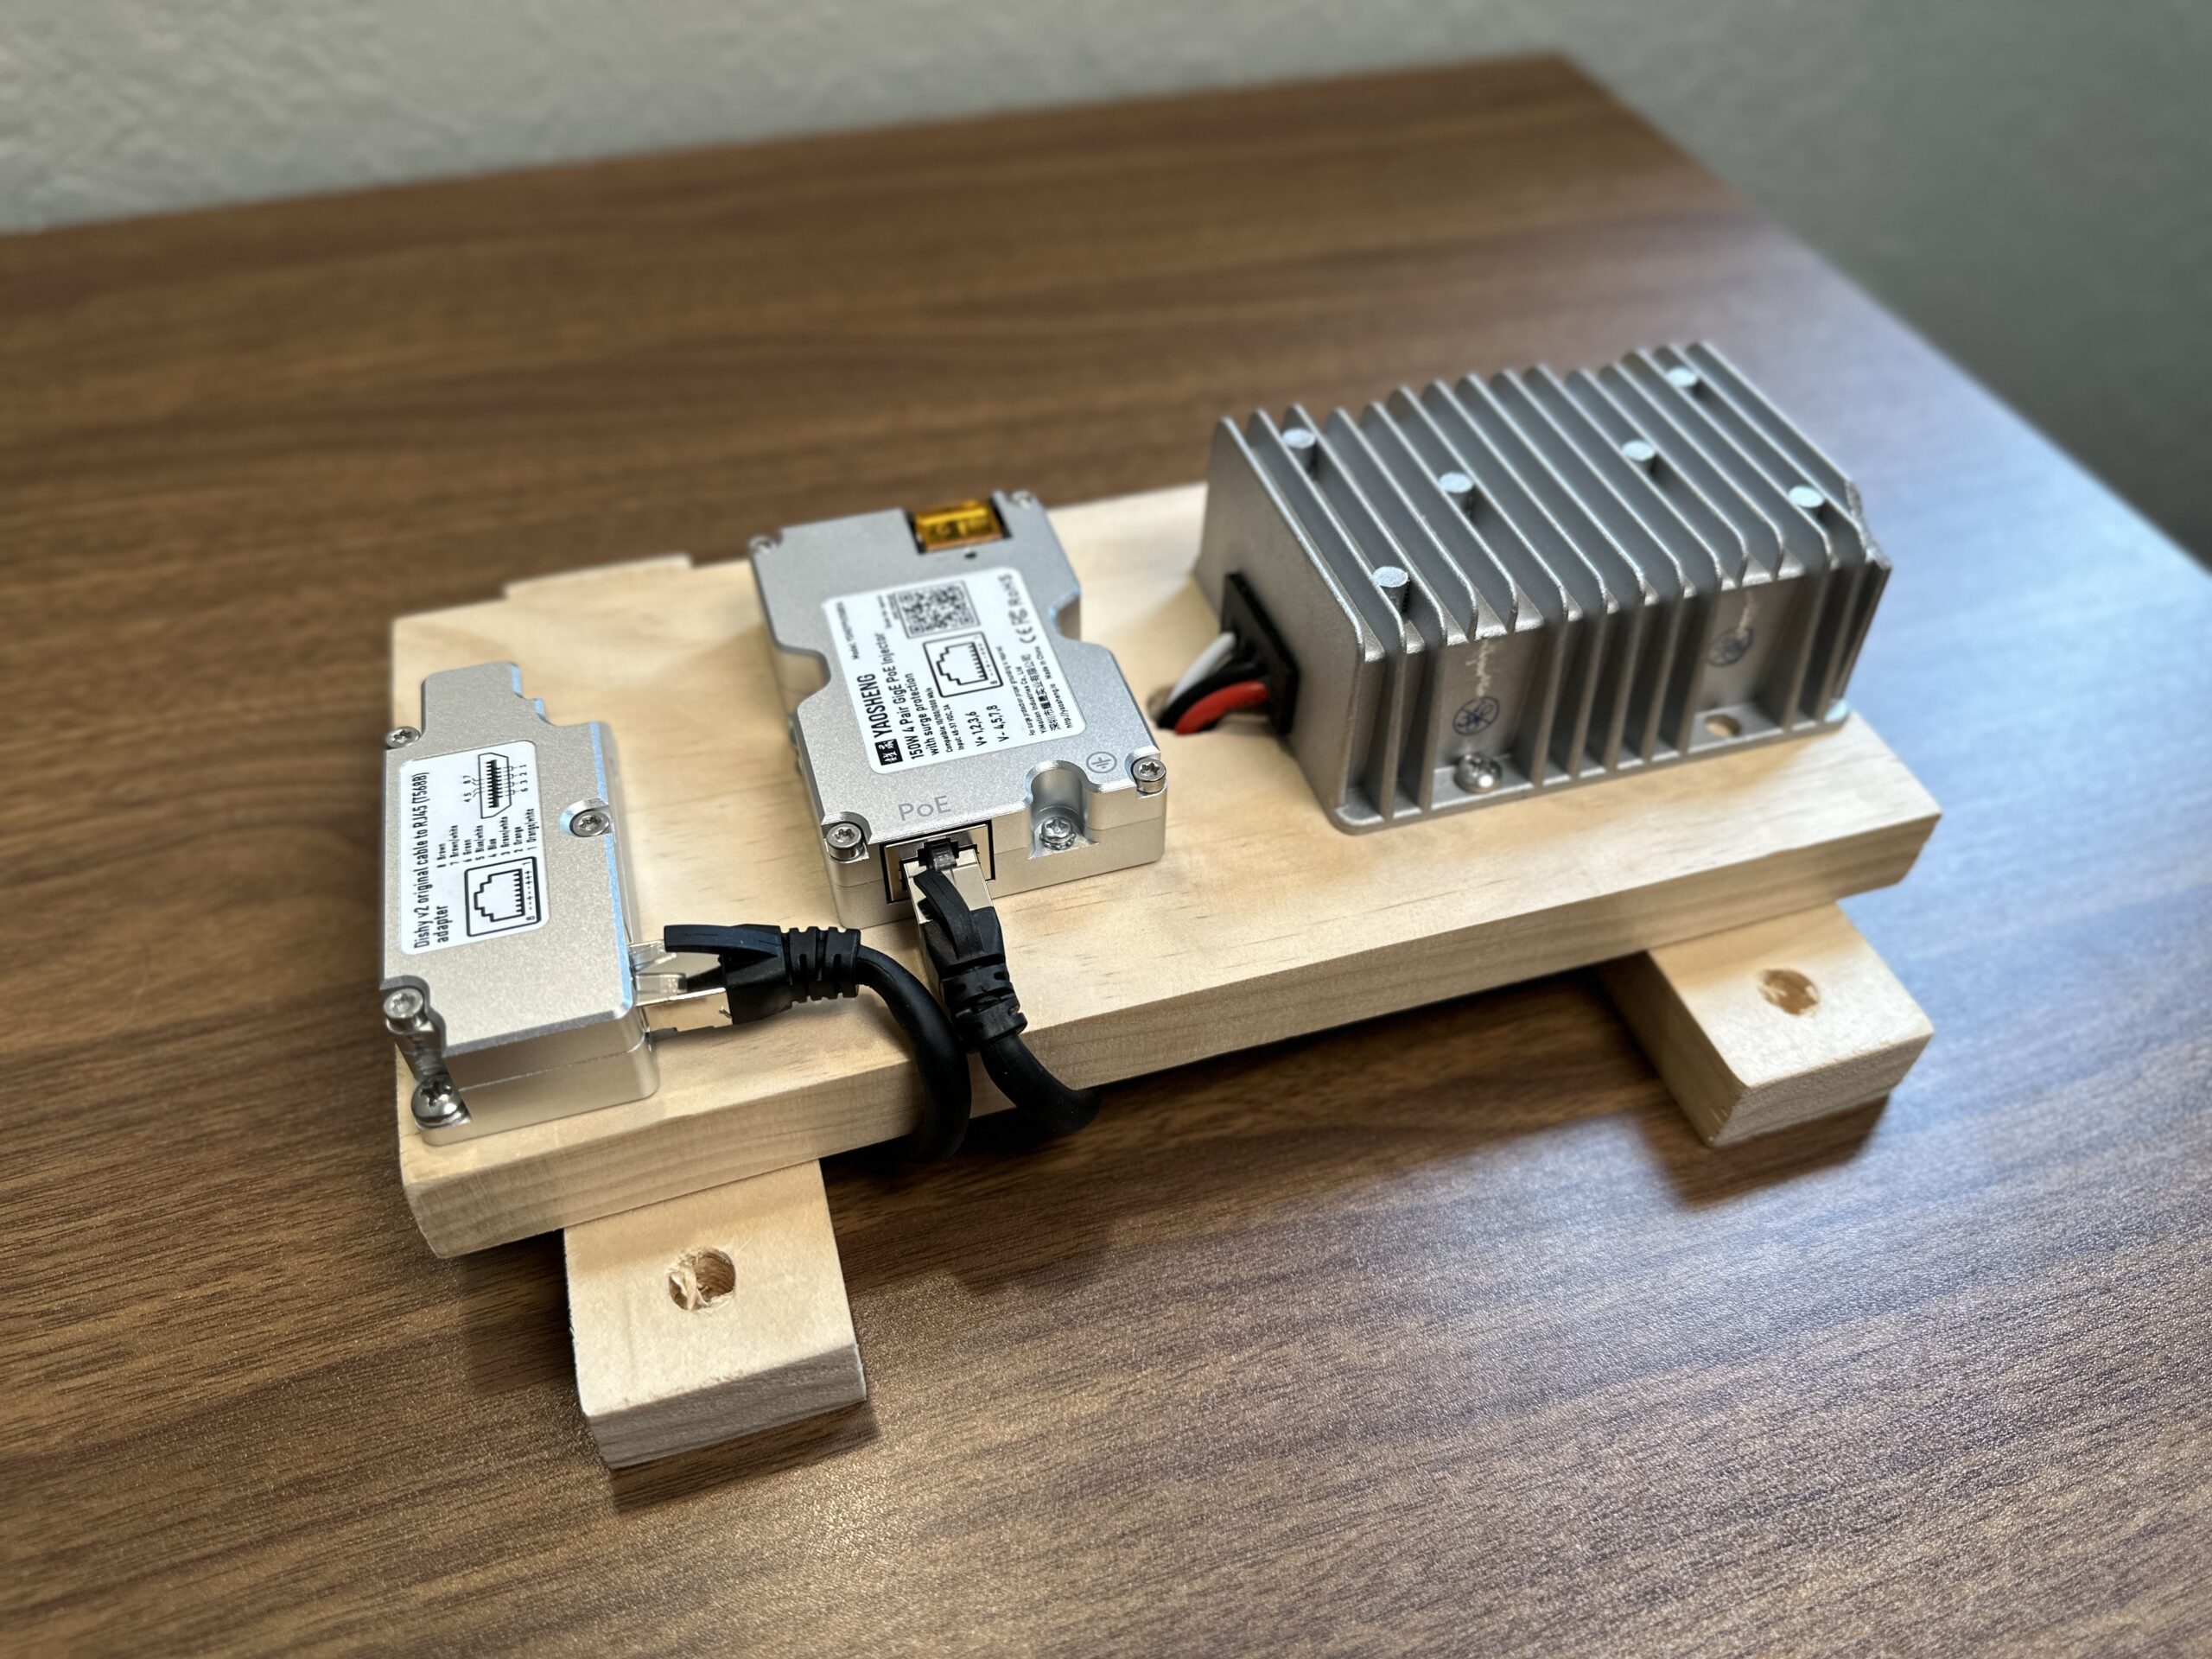 This image shows all the components of the Starlink 12V power supply screwed to a scrap piece of wood, ready for mounting in my RV.